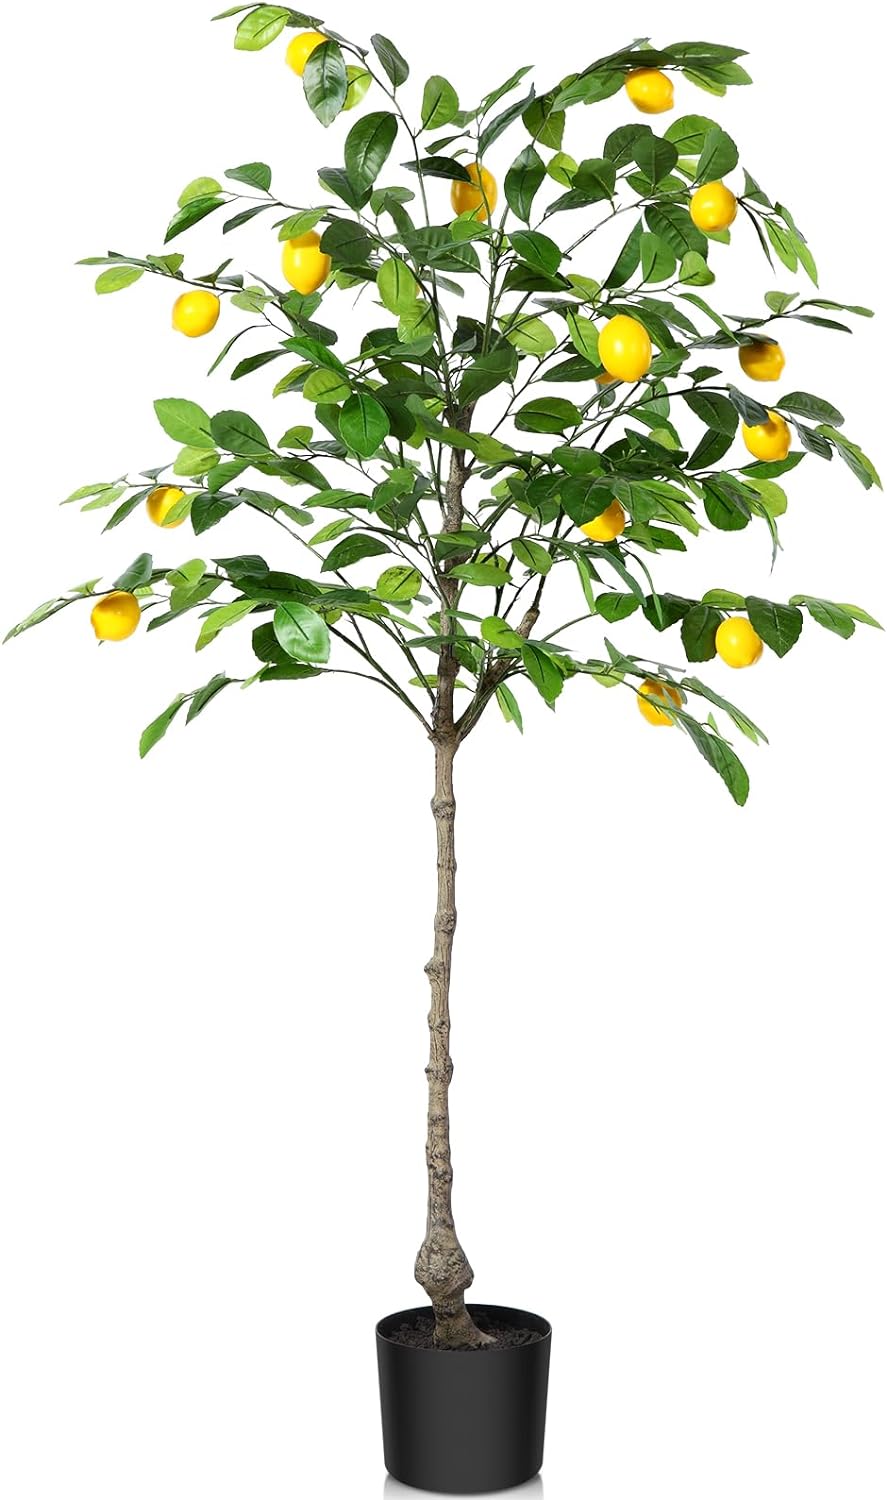 Lifelike Artificial Lemon Tree: Pre-Potted Faux Plant for Home and Office Decor